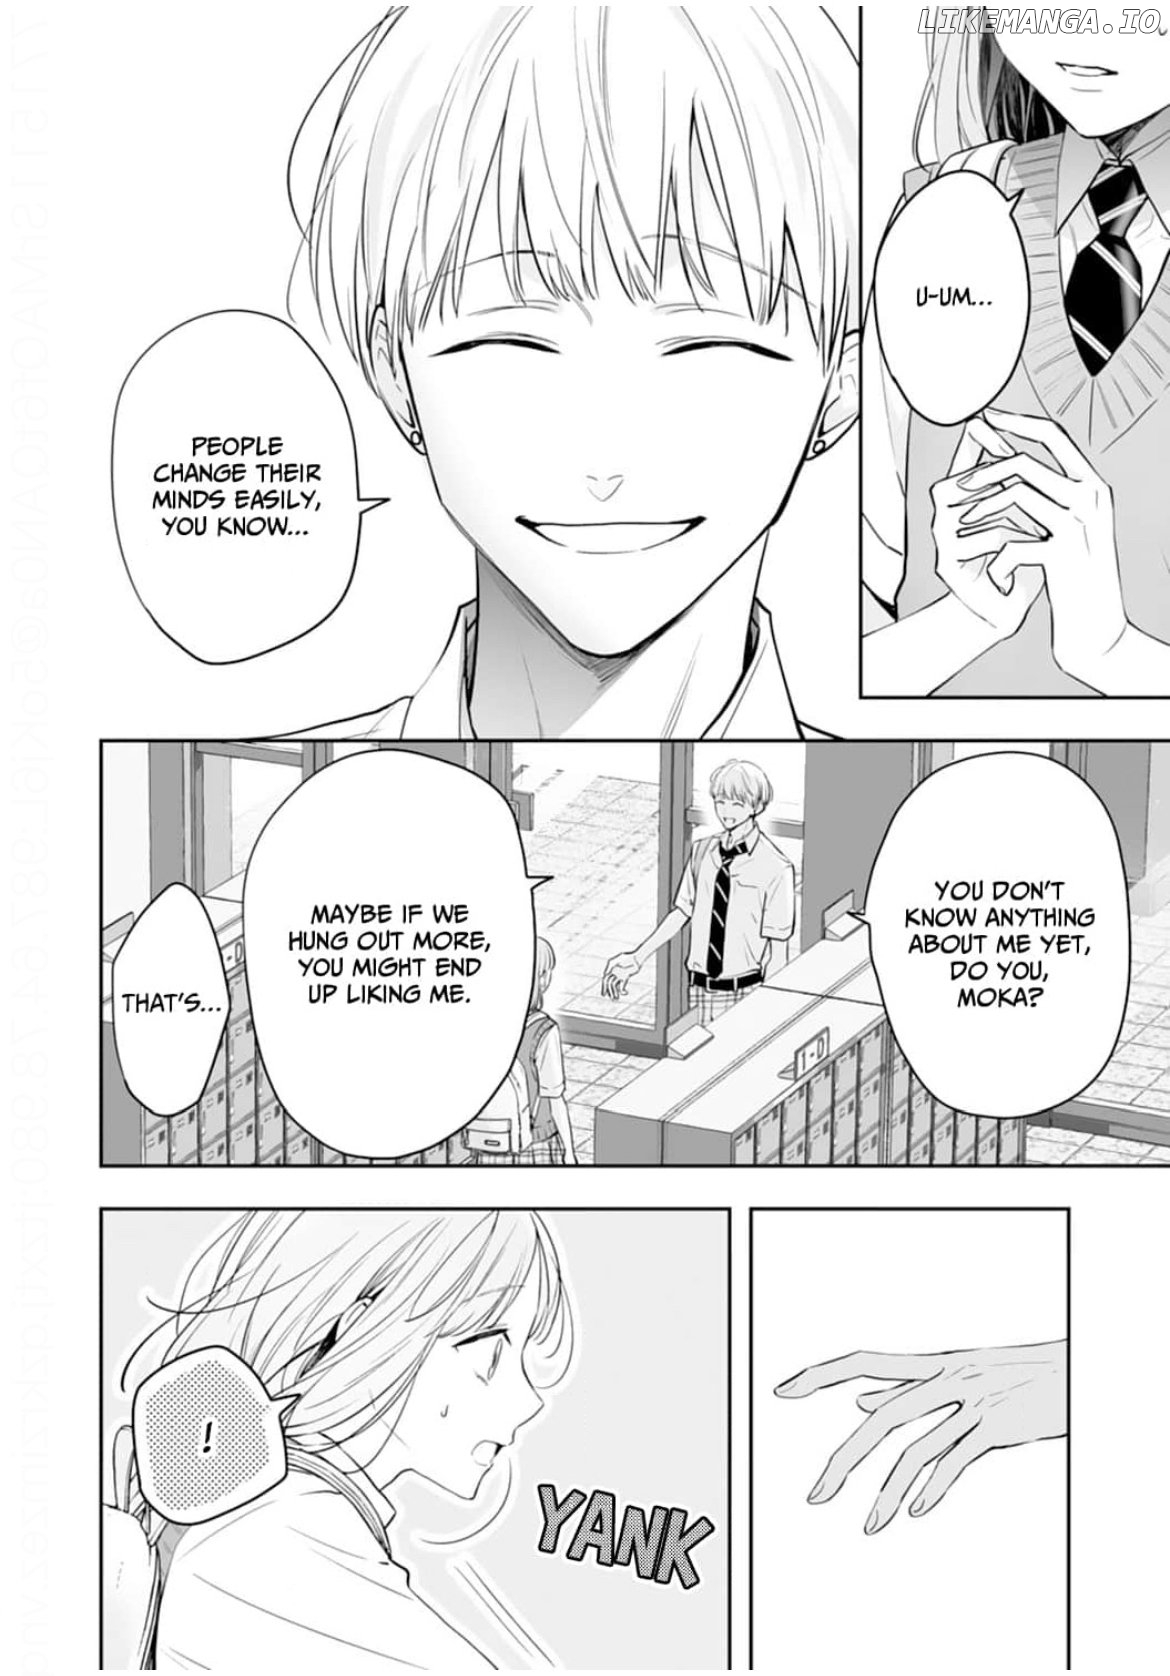 Kurosaki Wants Me All to Himself ~The Intense Sweetness of First Love~ Chapter 13 - page 6